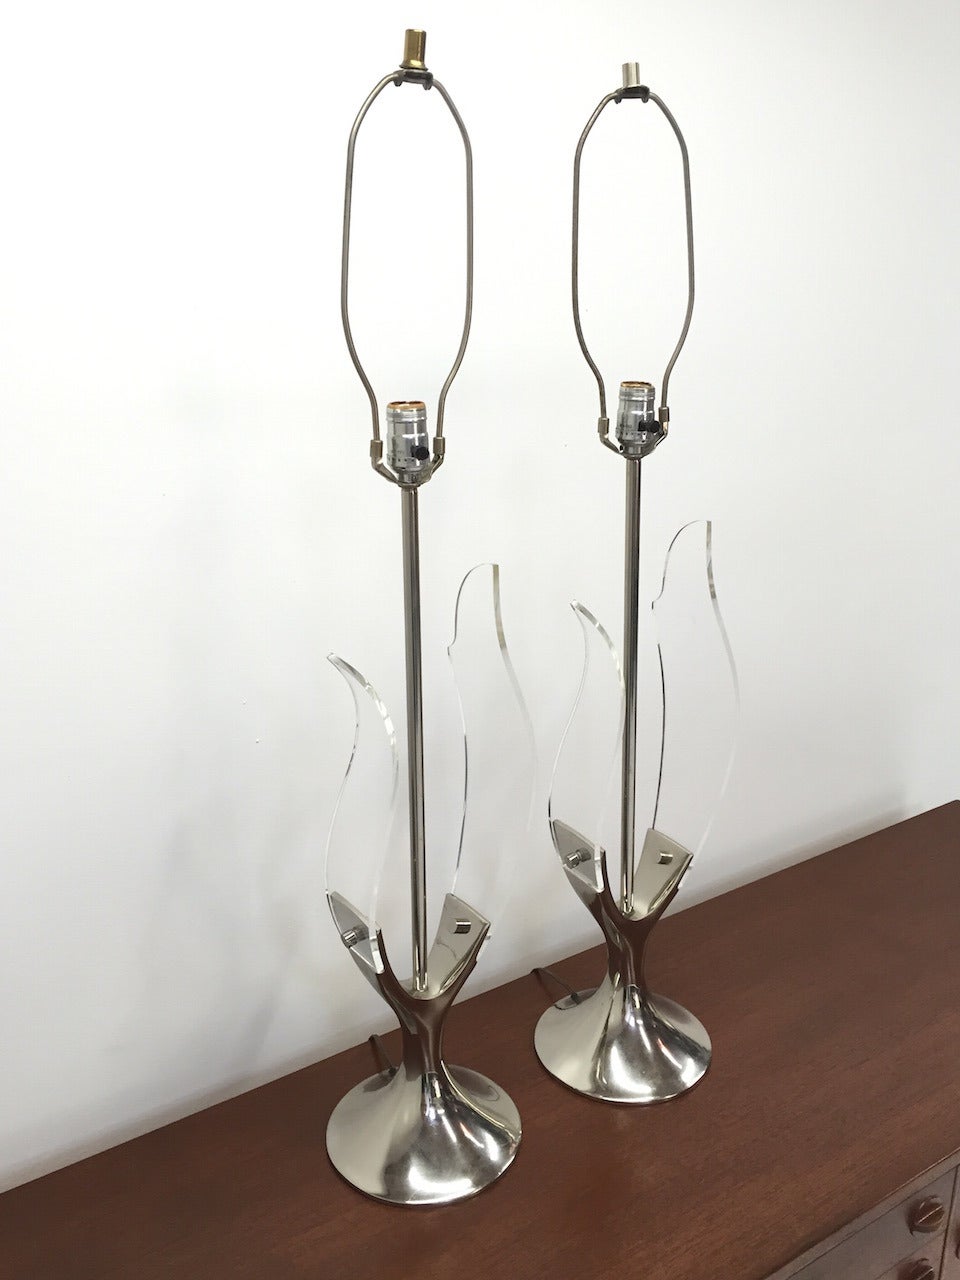 Exceptional Pair of Chrome and Lucite Table Lamps by Laurel Lamp Co.  Nice original condition.  No Shades.  Measurement is to the top of the finial.